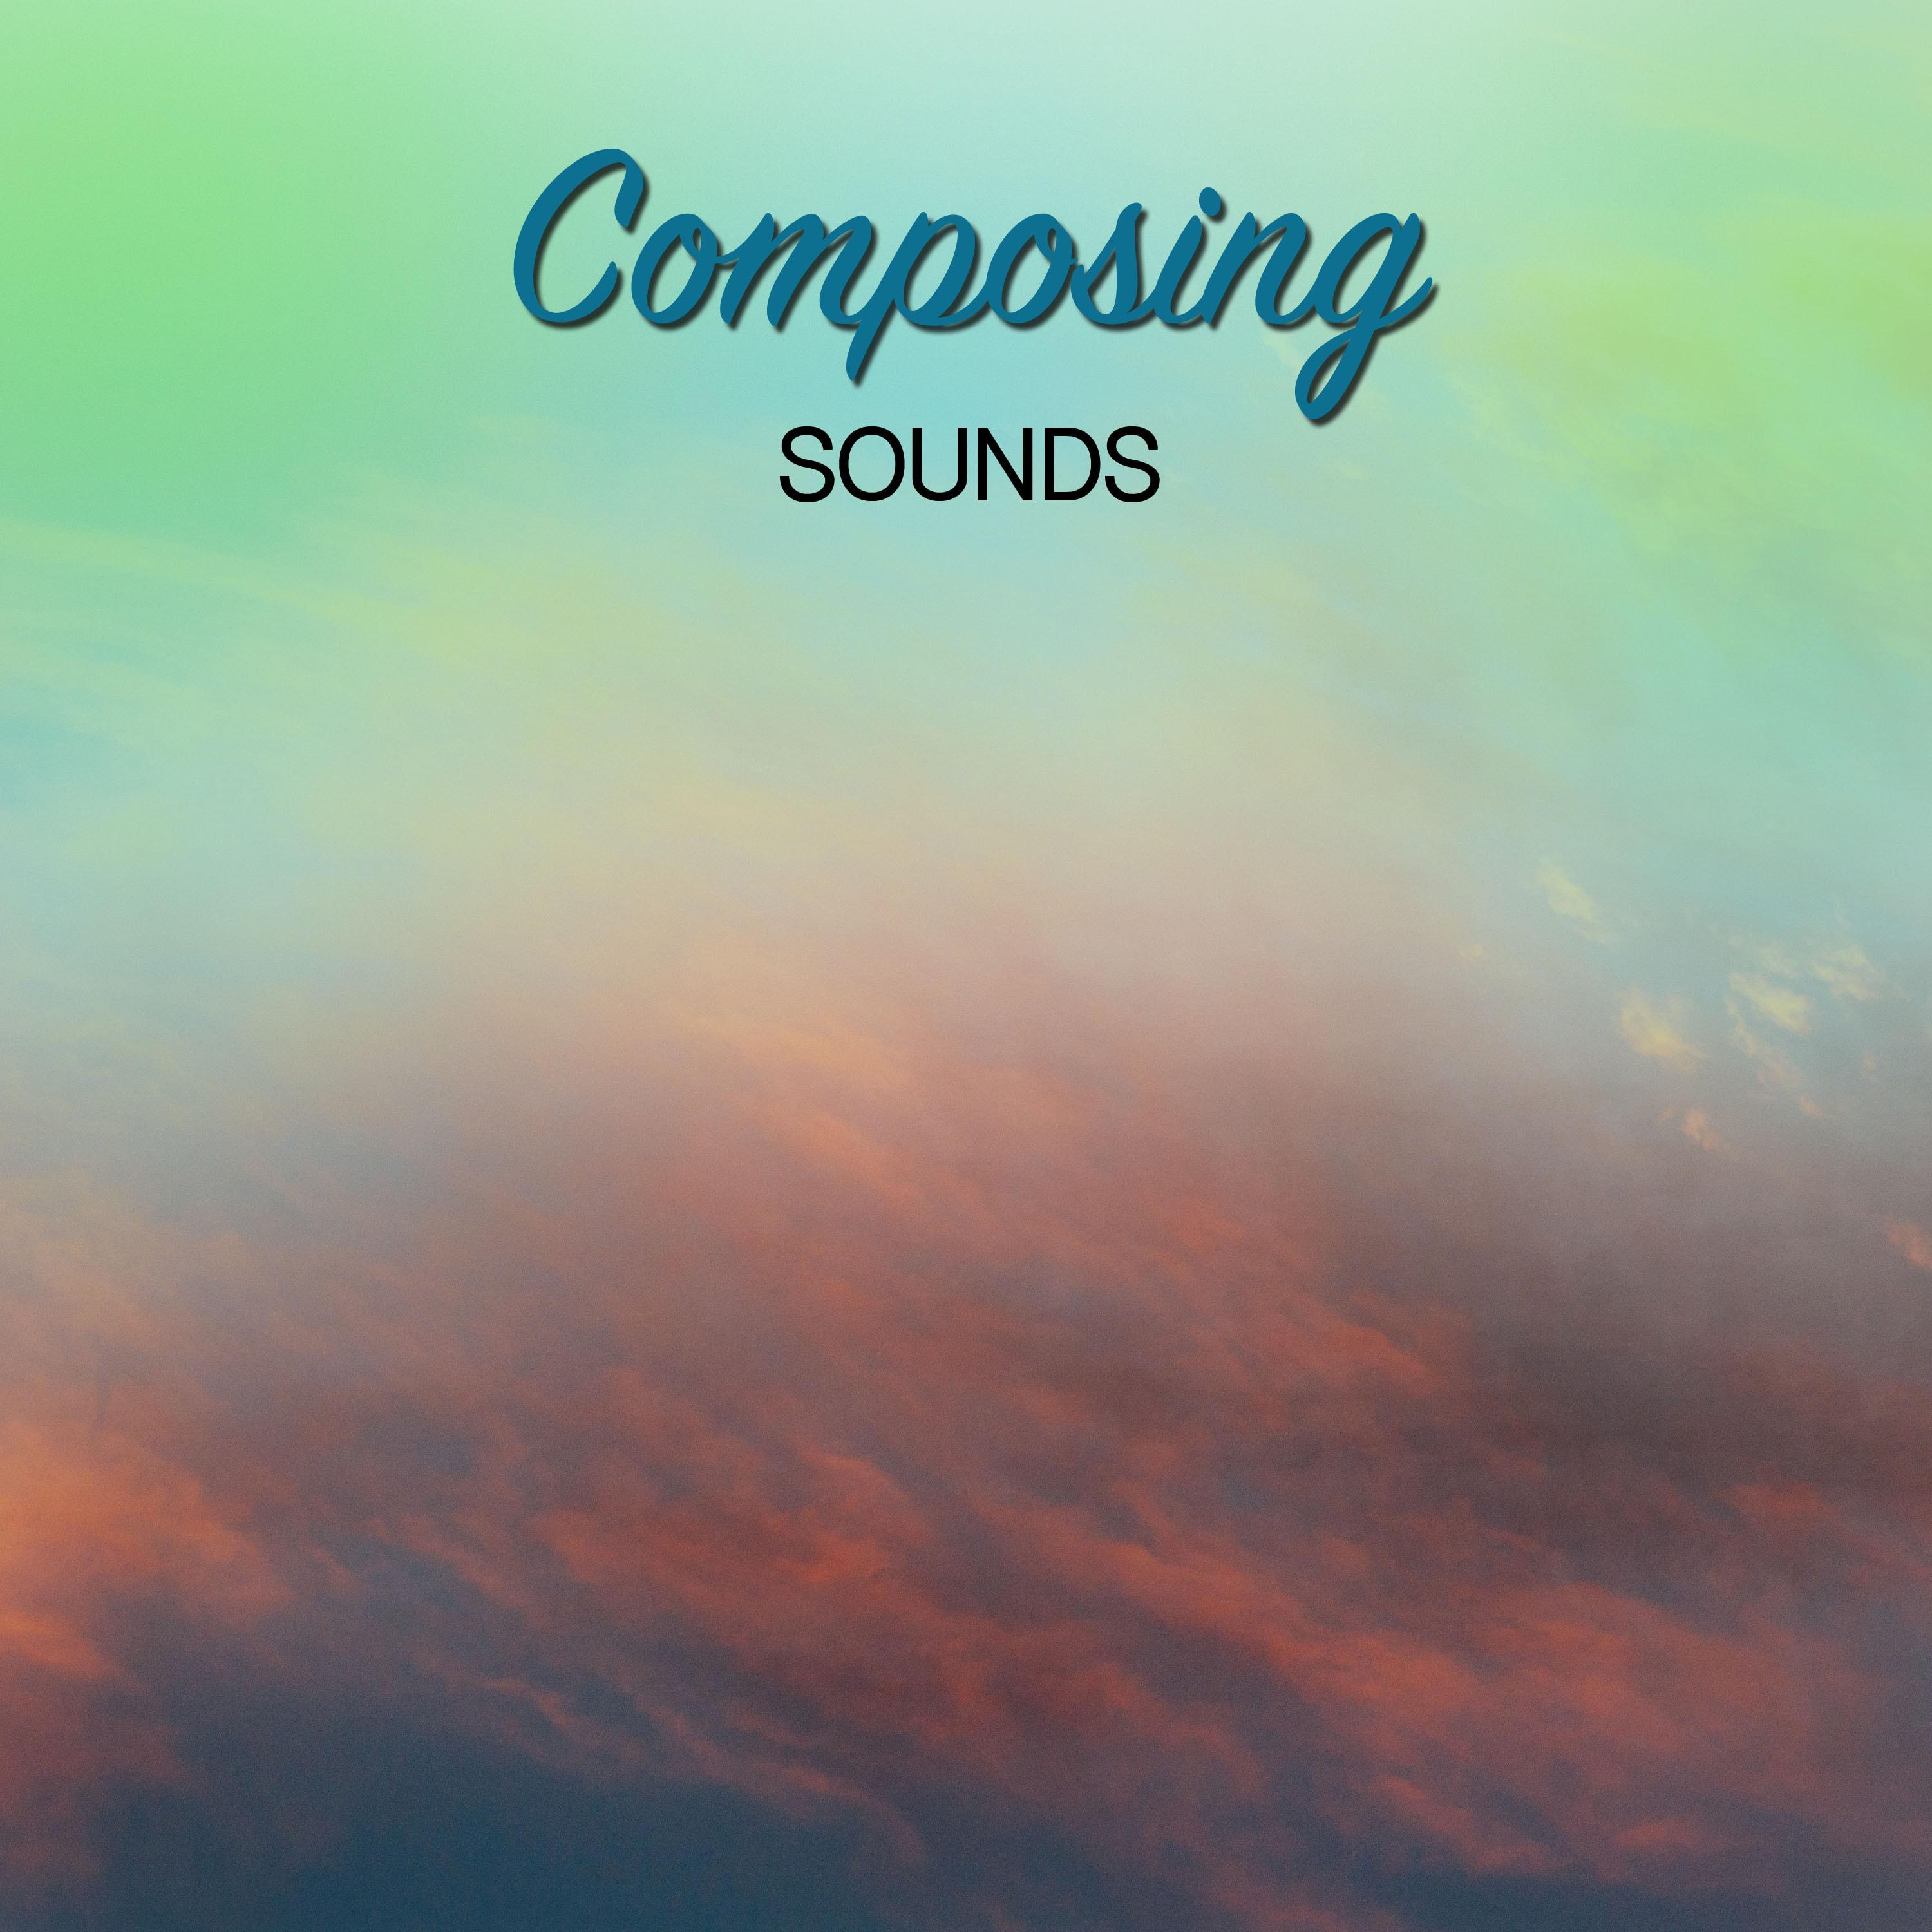 #16 Composing Sounds for Sleep and Relaxation